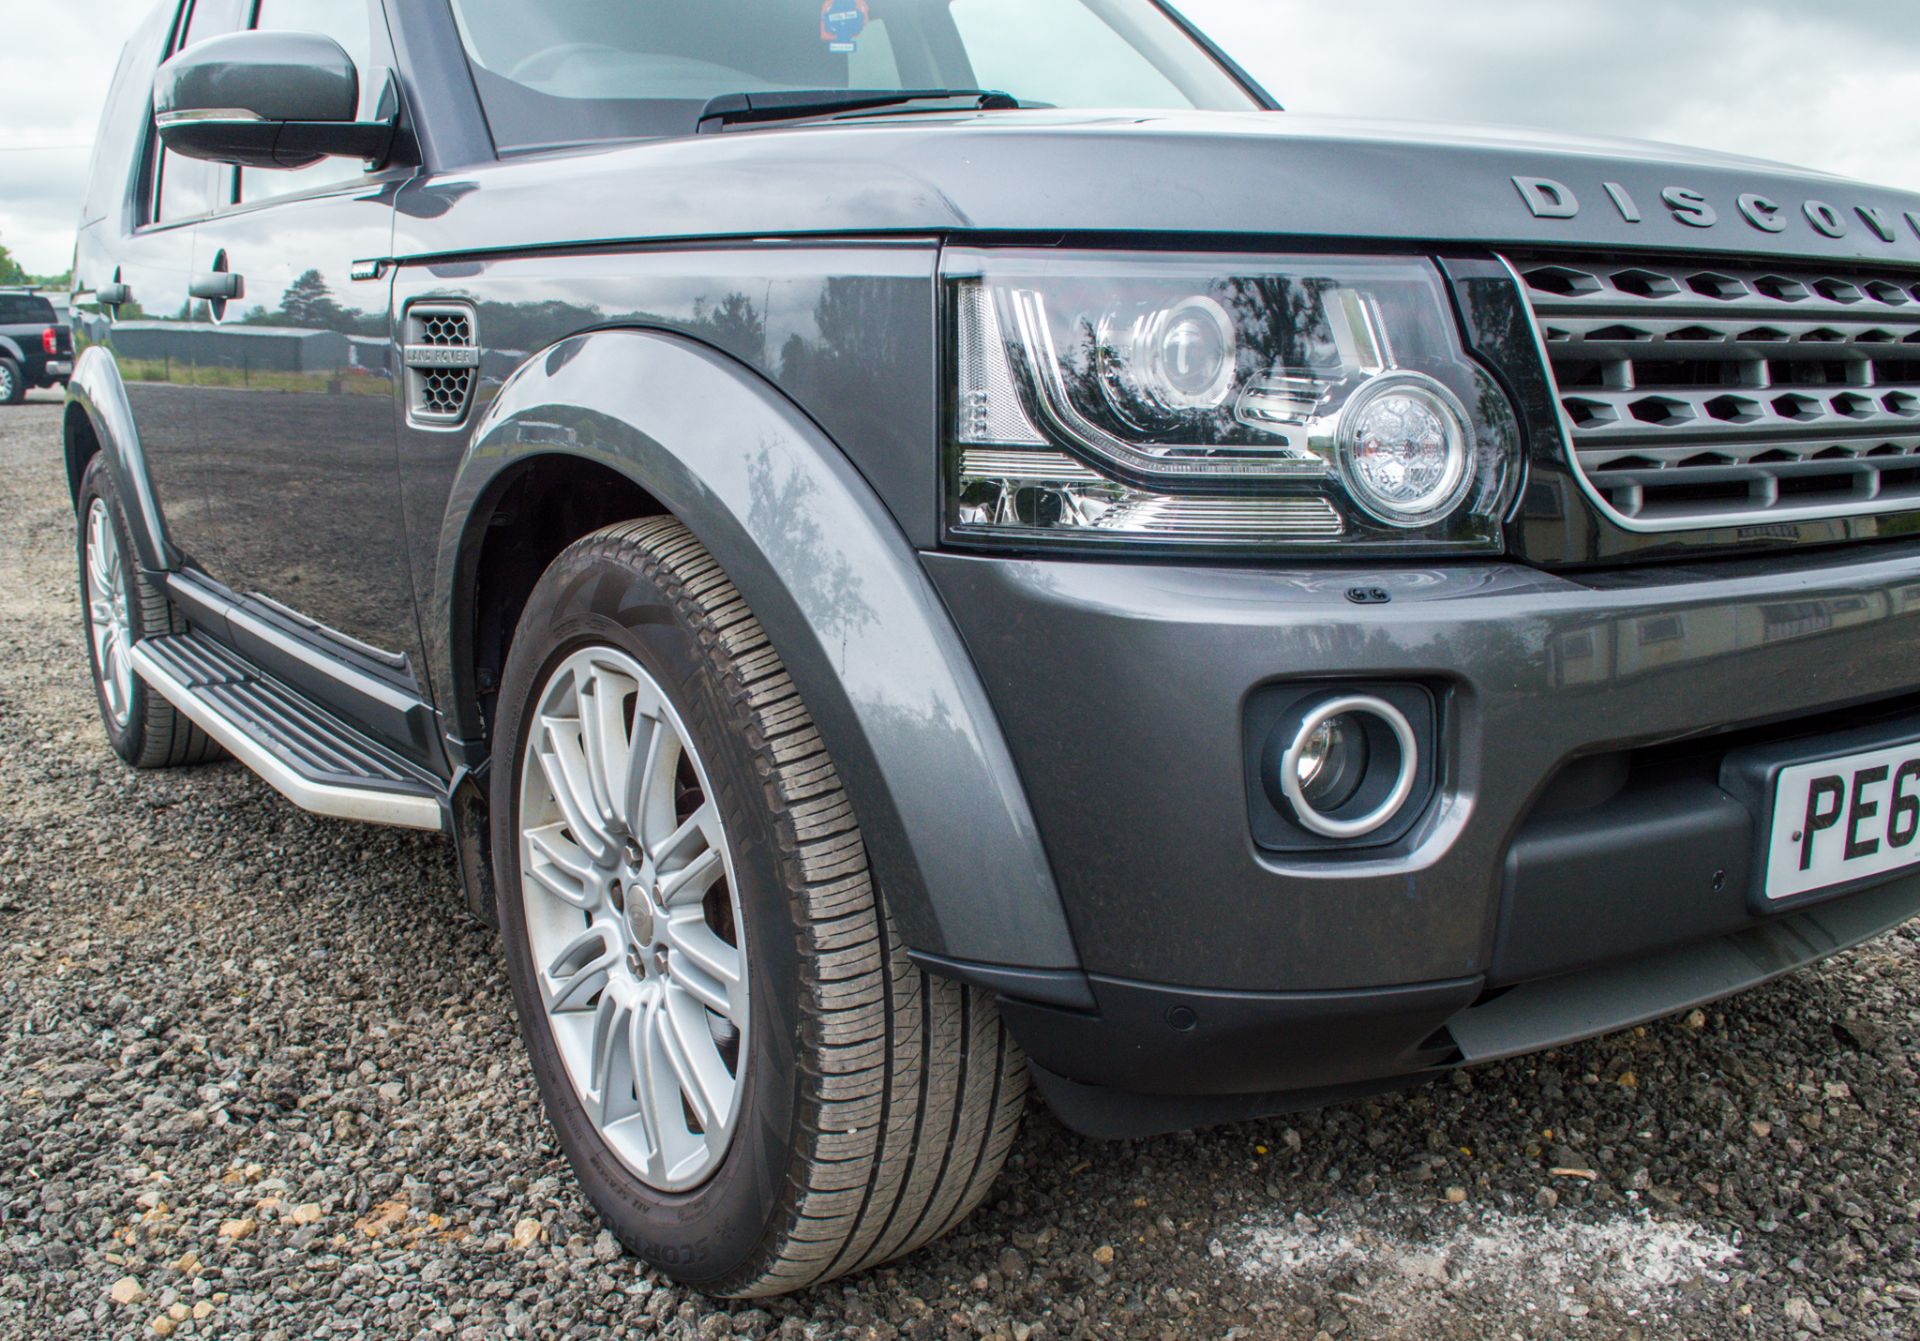 Land Rover Discovery 4 SE 3.0 TDV6 Commercial 4 wheel drive utility vehicle  Reg No: PE 65 NJY  Date - Image 13 of 23